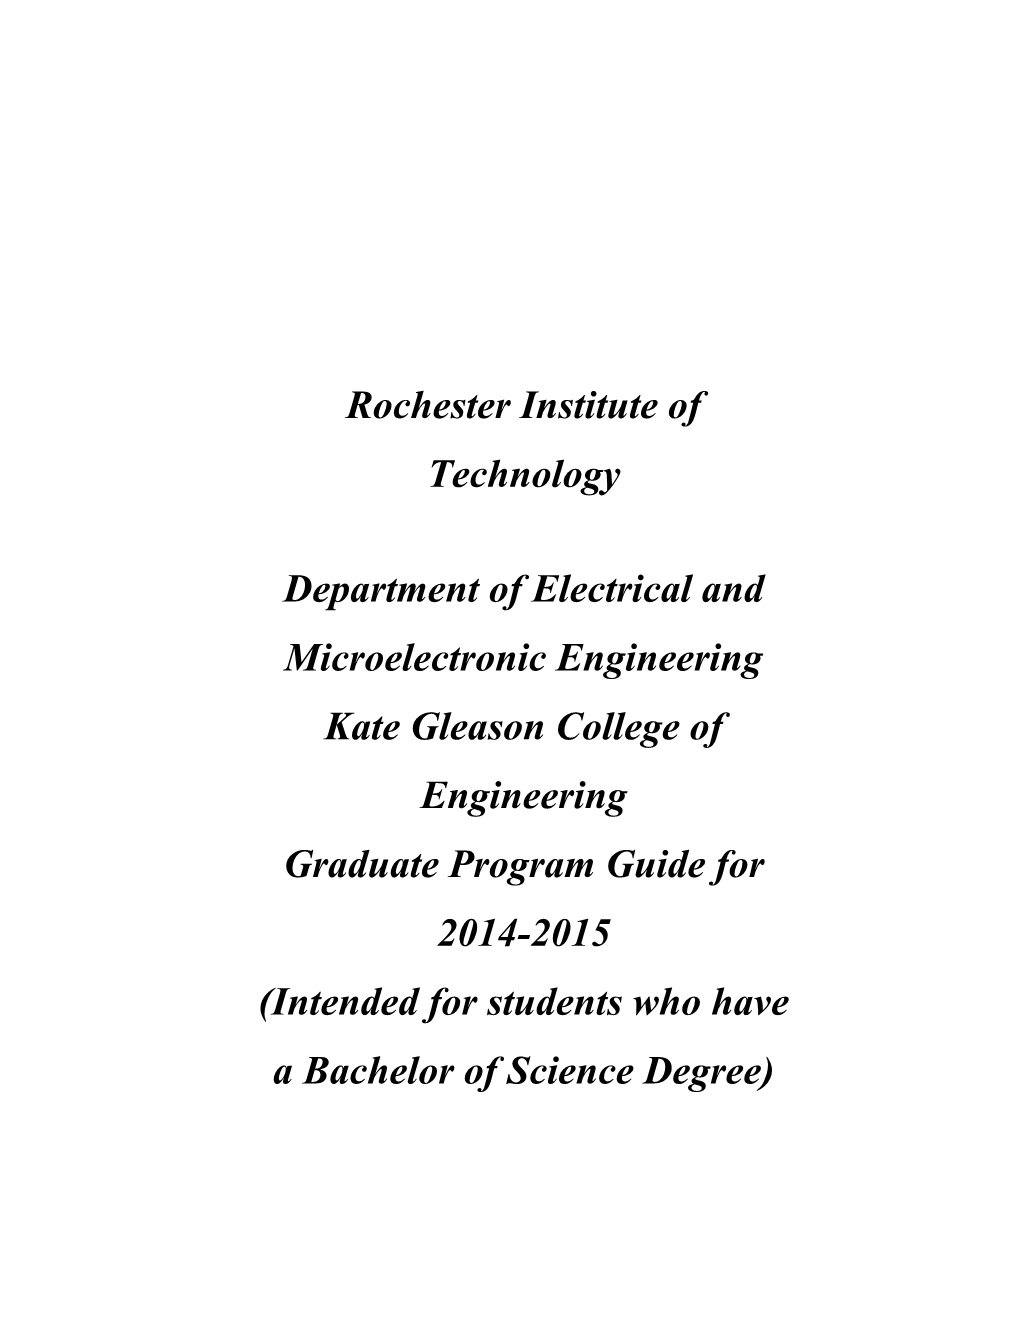 Department of Electrical and Microelectronic Engineering